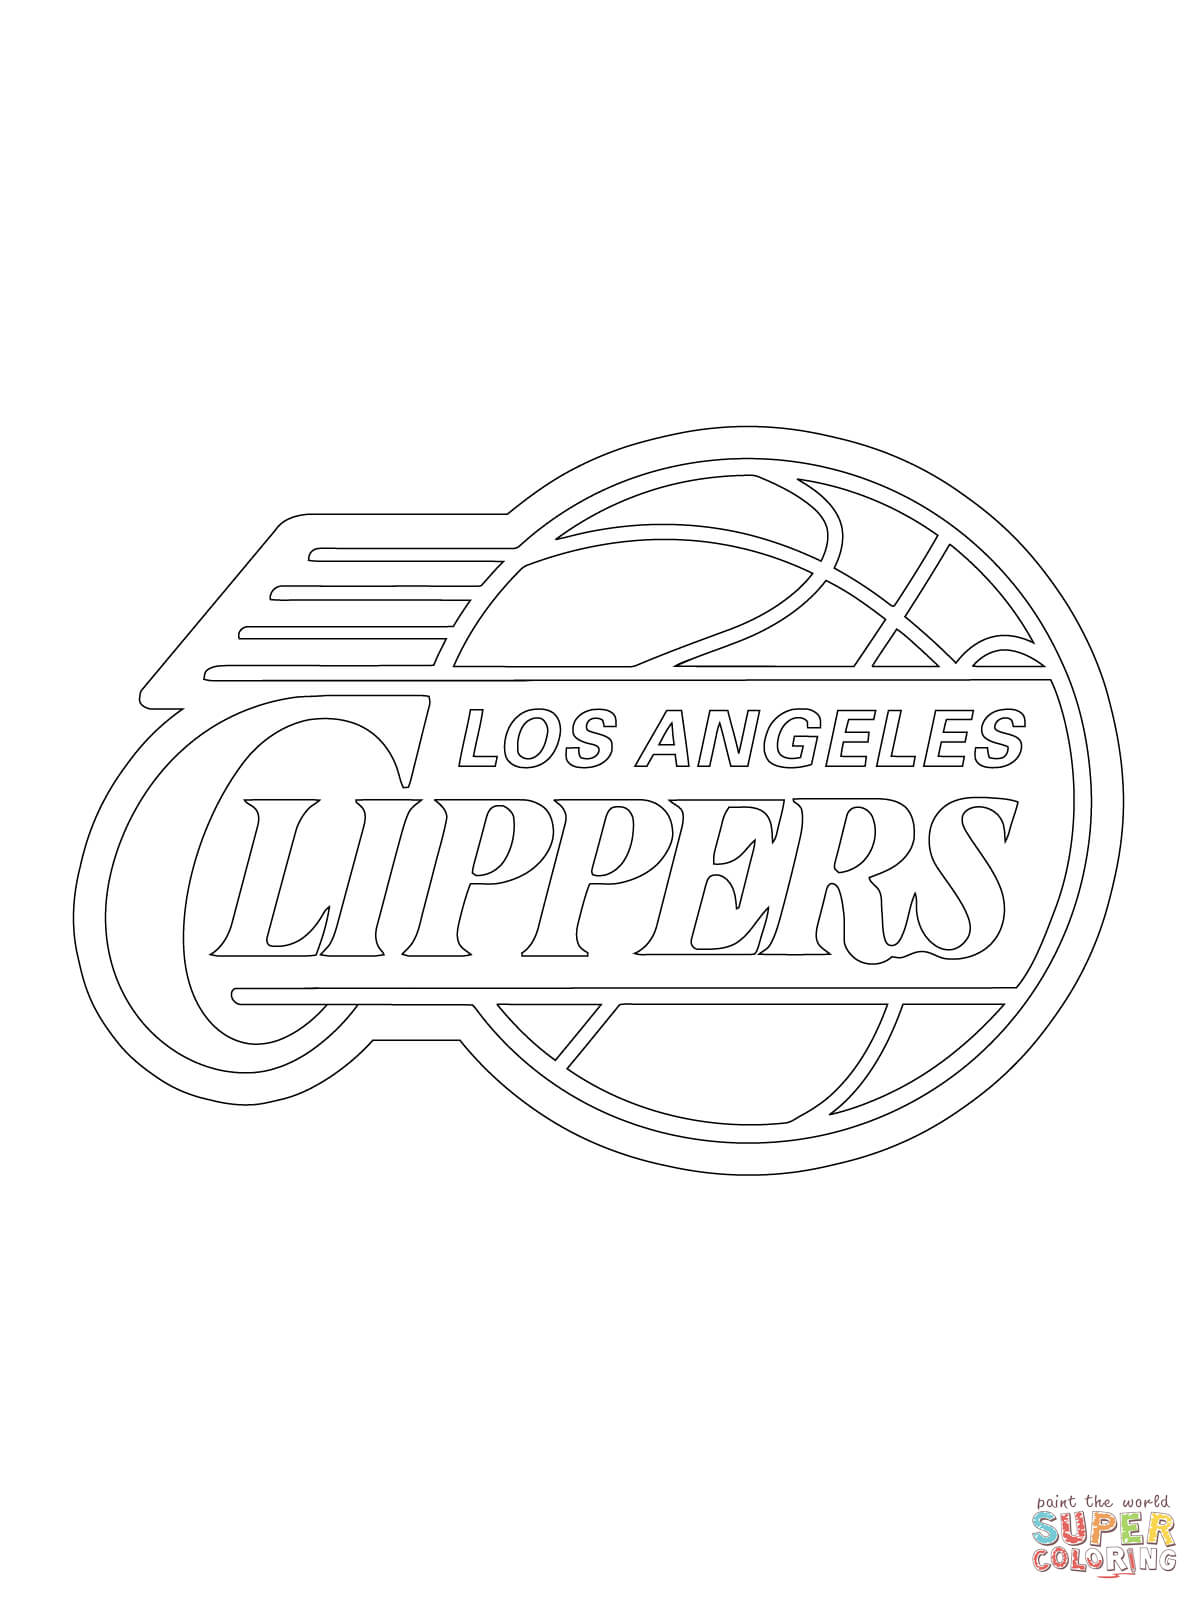 Los angeles clippers logo coloring page free printable coloring pages